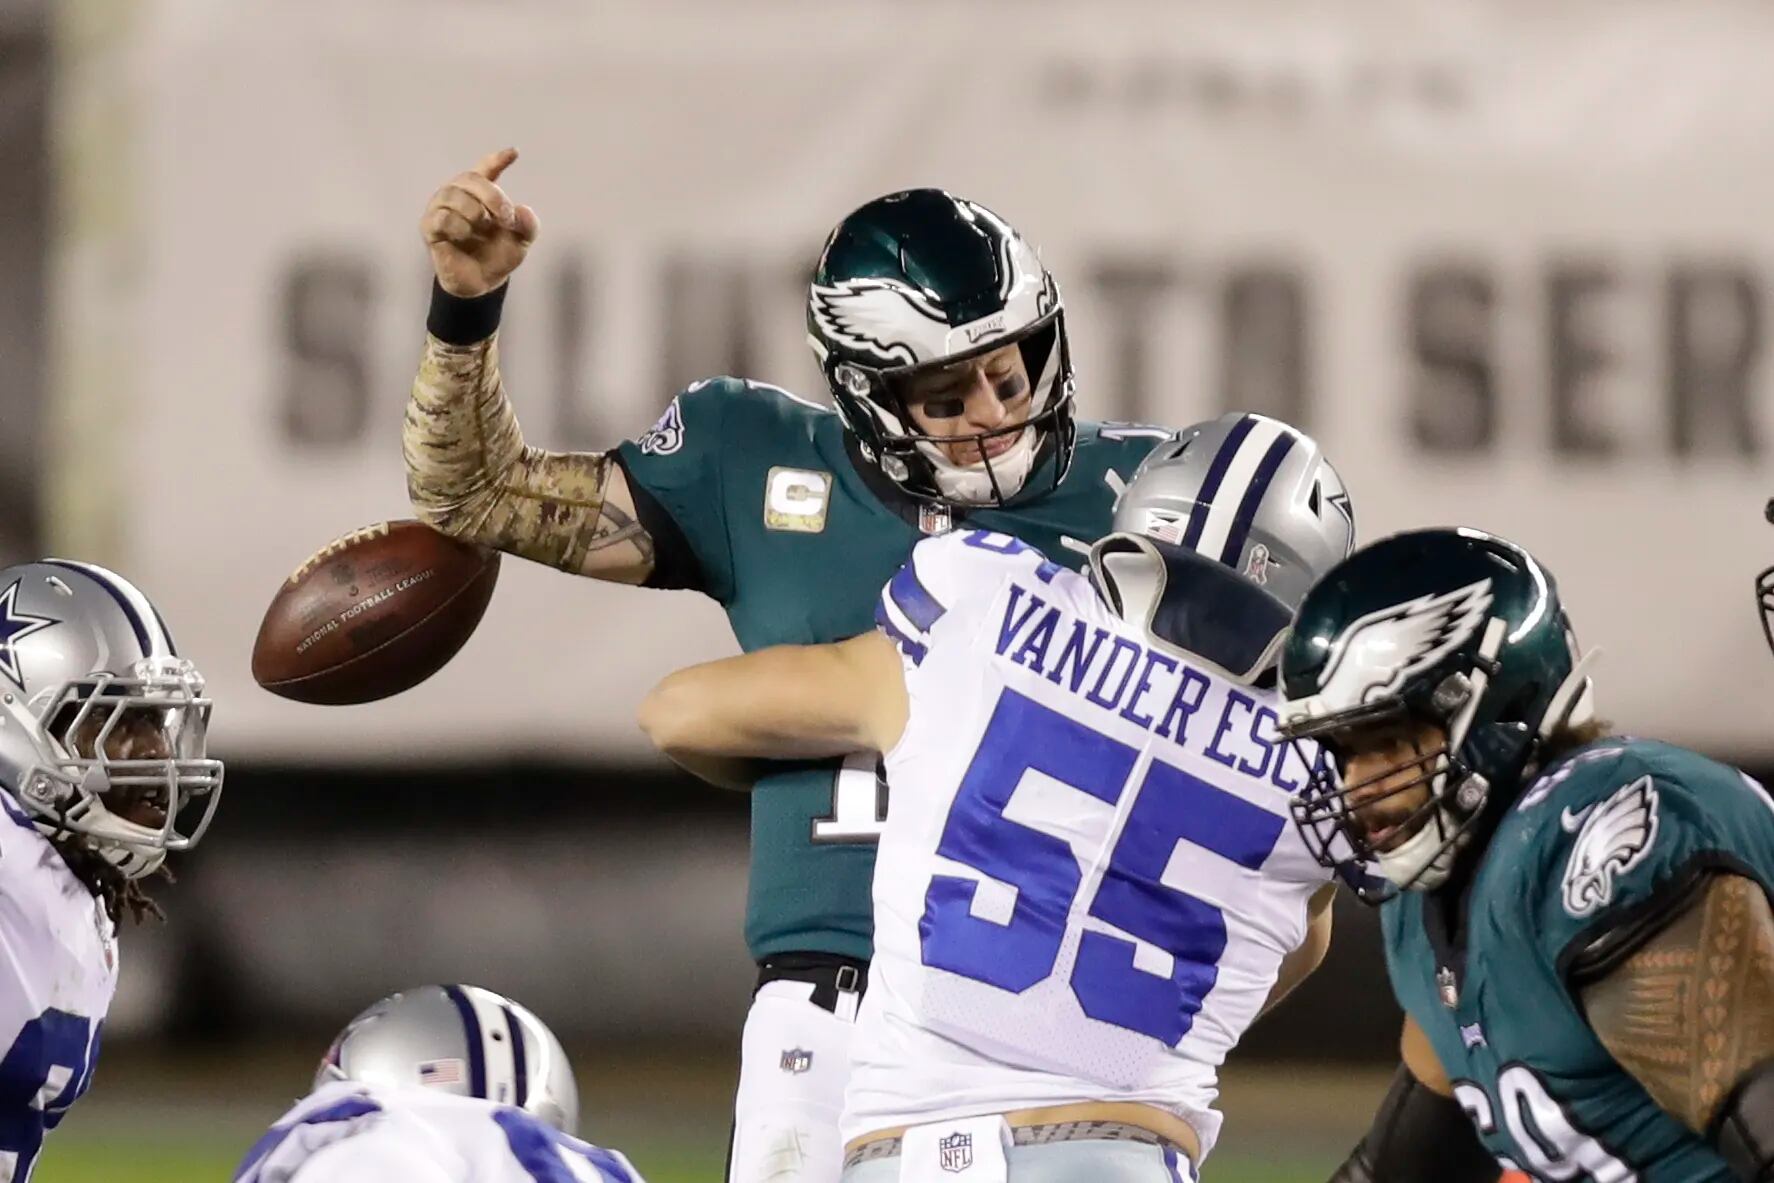 HAYES: With Eagles' Wentz struggling, it's time to give Hurts a shot